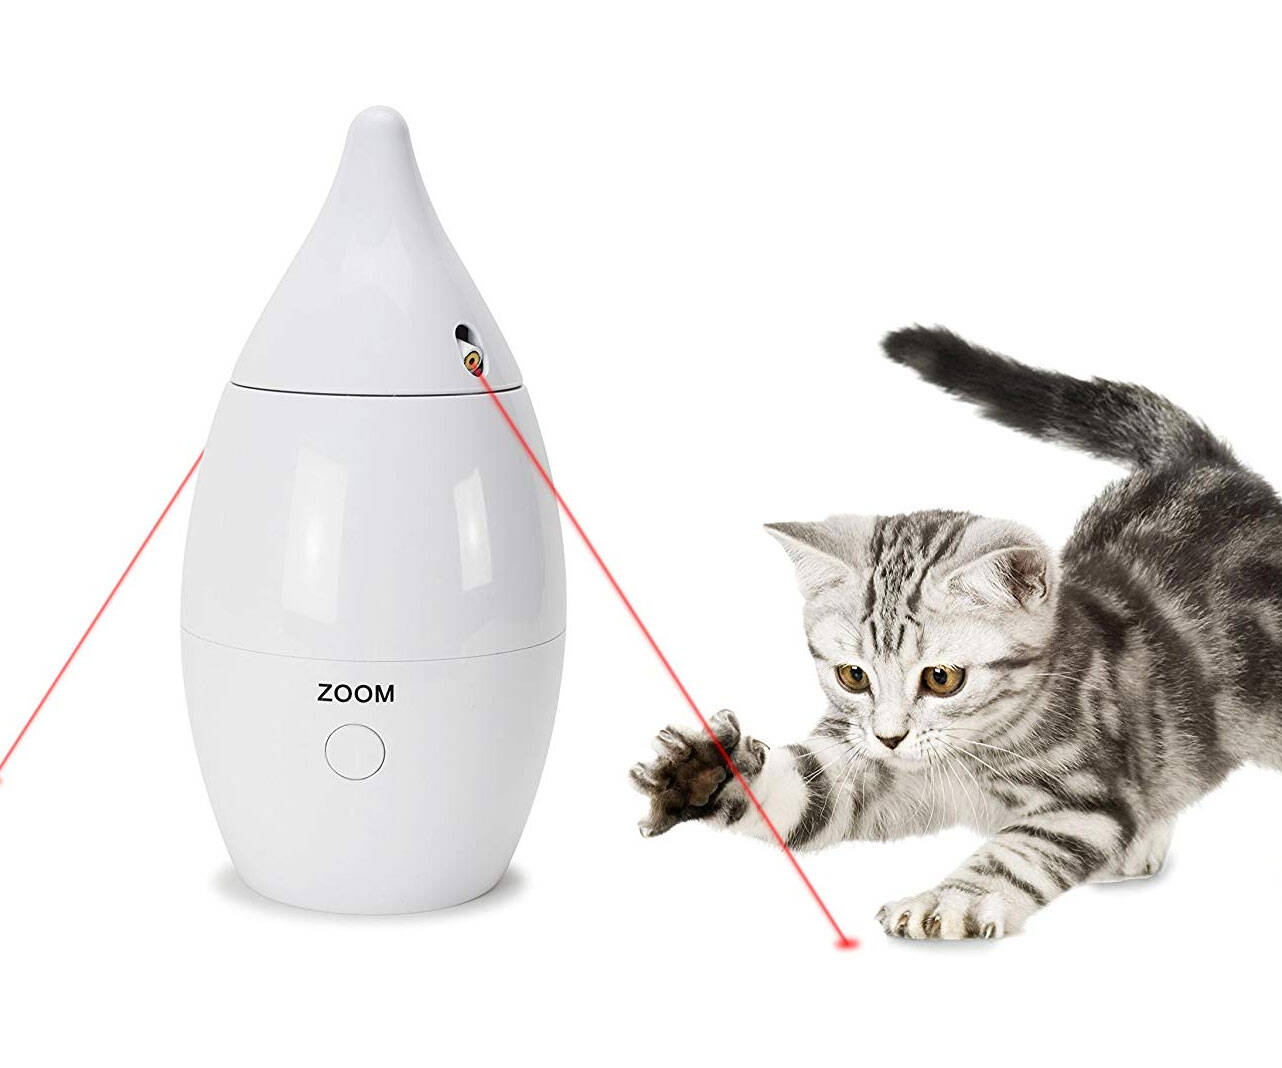 Rotating Laser Cat Toy - //coolthings.us